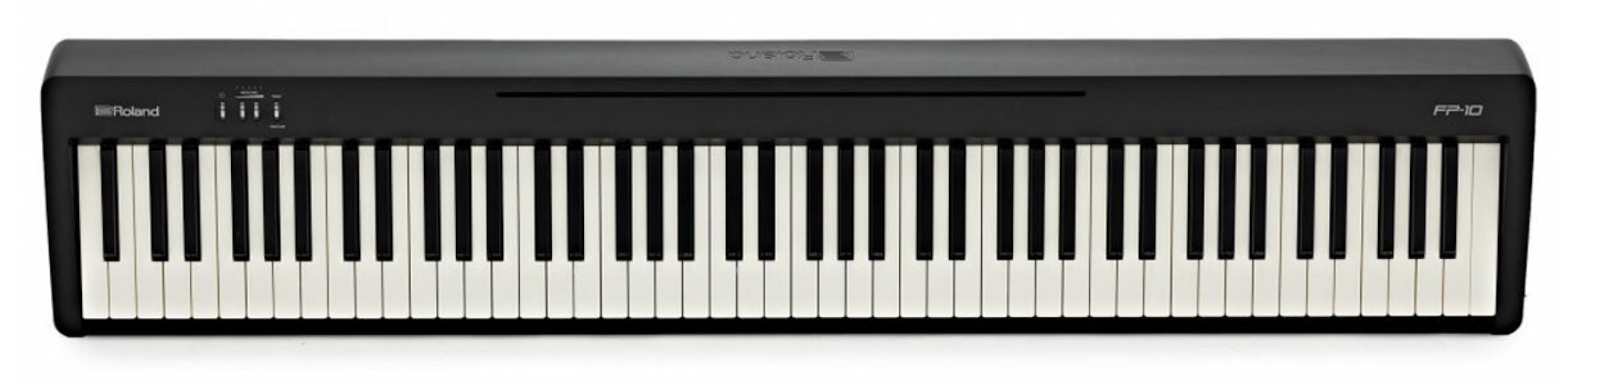 Roland FP 10 digital keyboard with weighted keys.